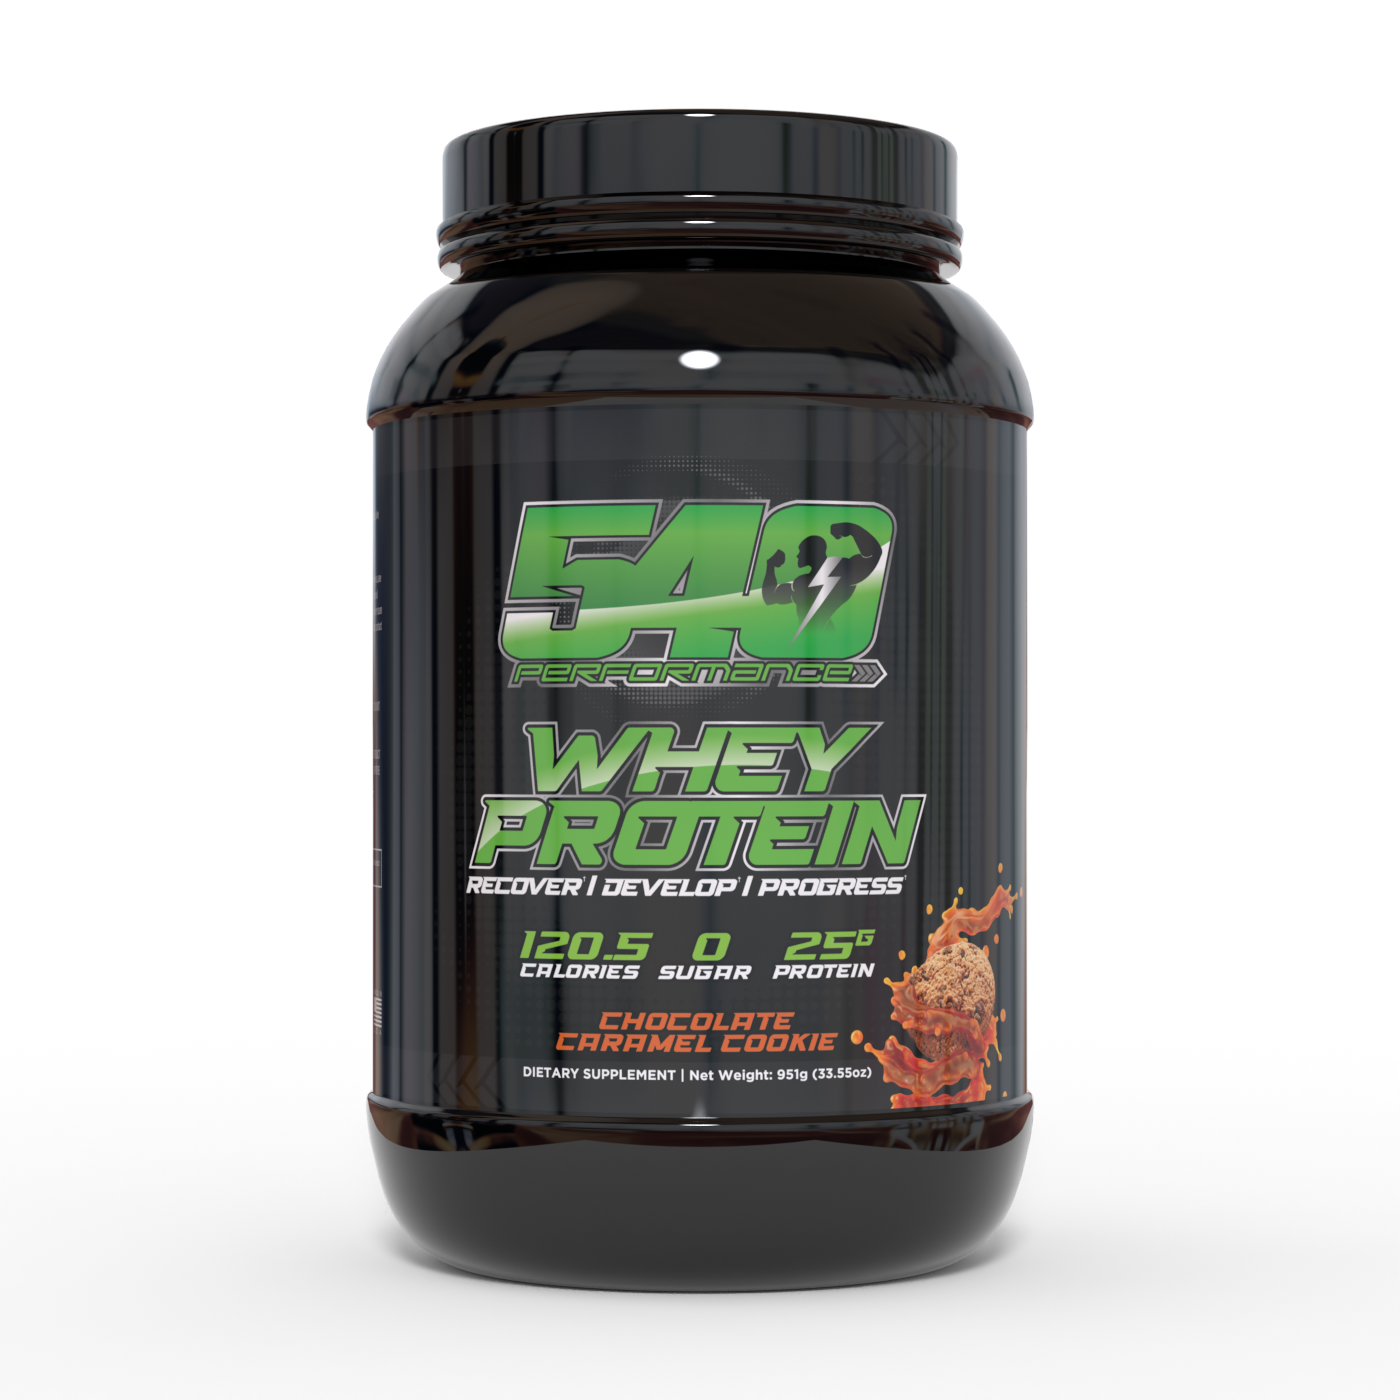 Black container with green text reading “540 performance whey protein” 